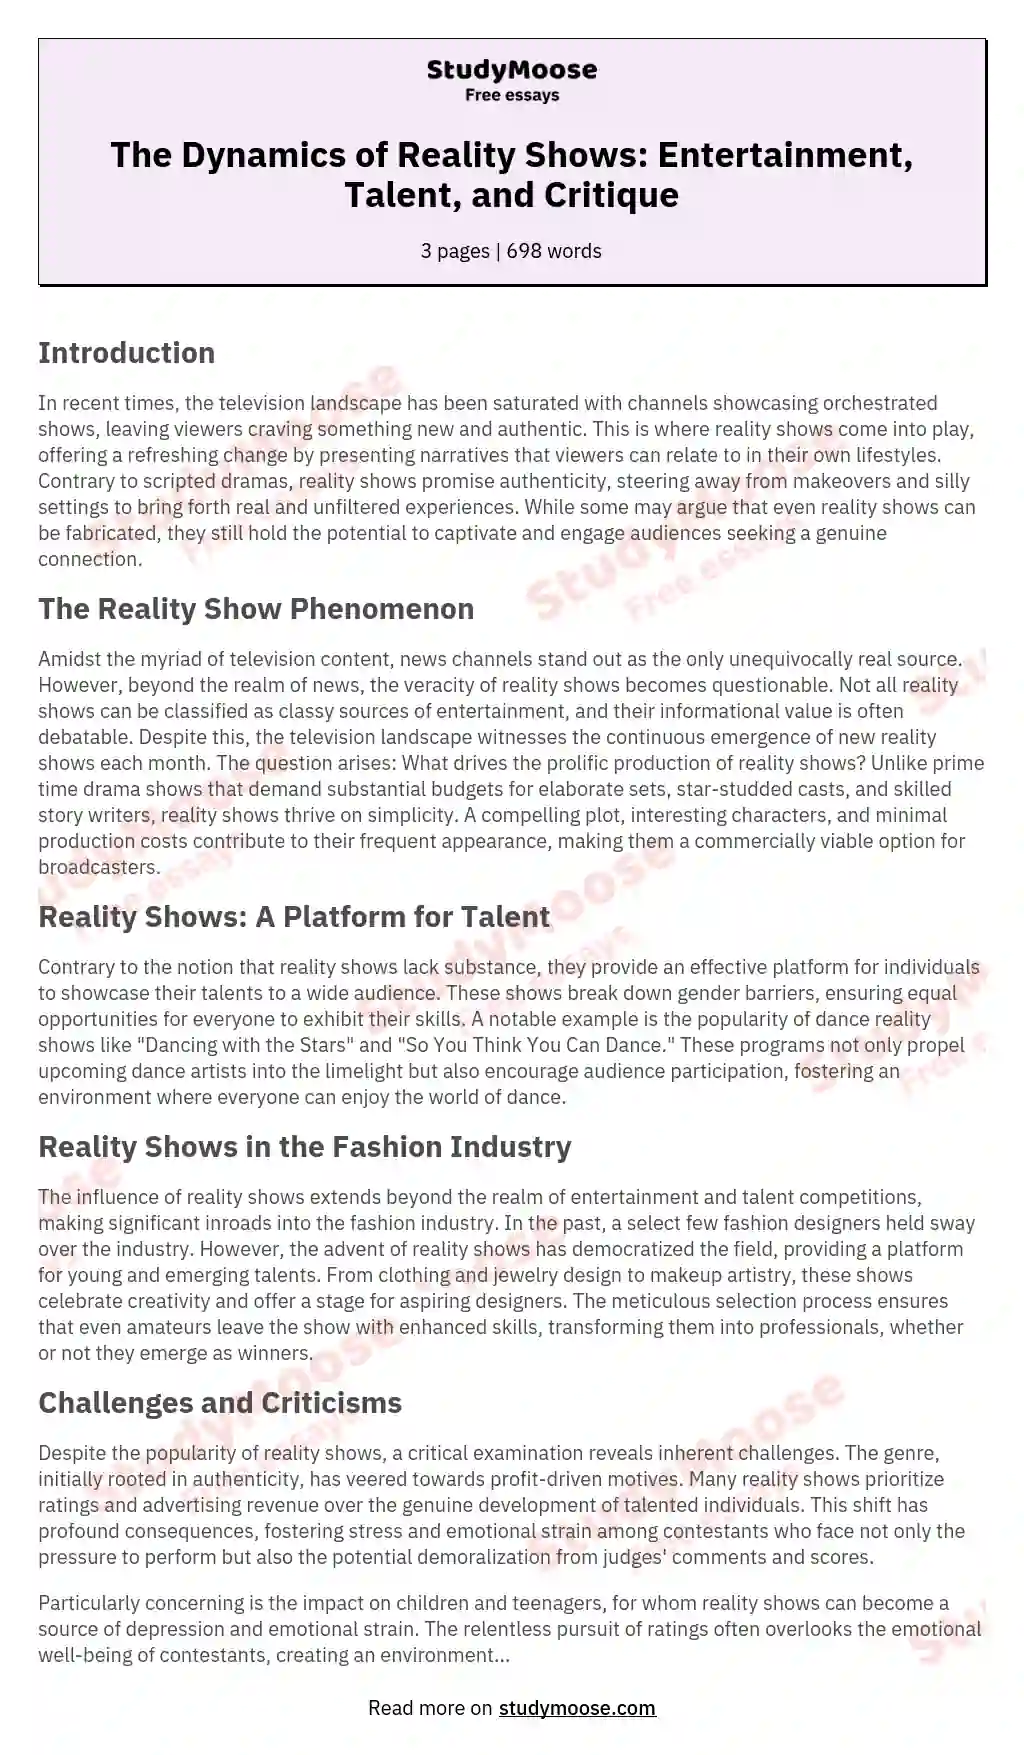 The Dynamics of Reality Shows: Entertainment, Talent, and Critique essay